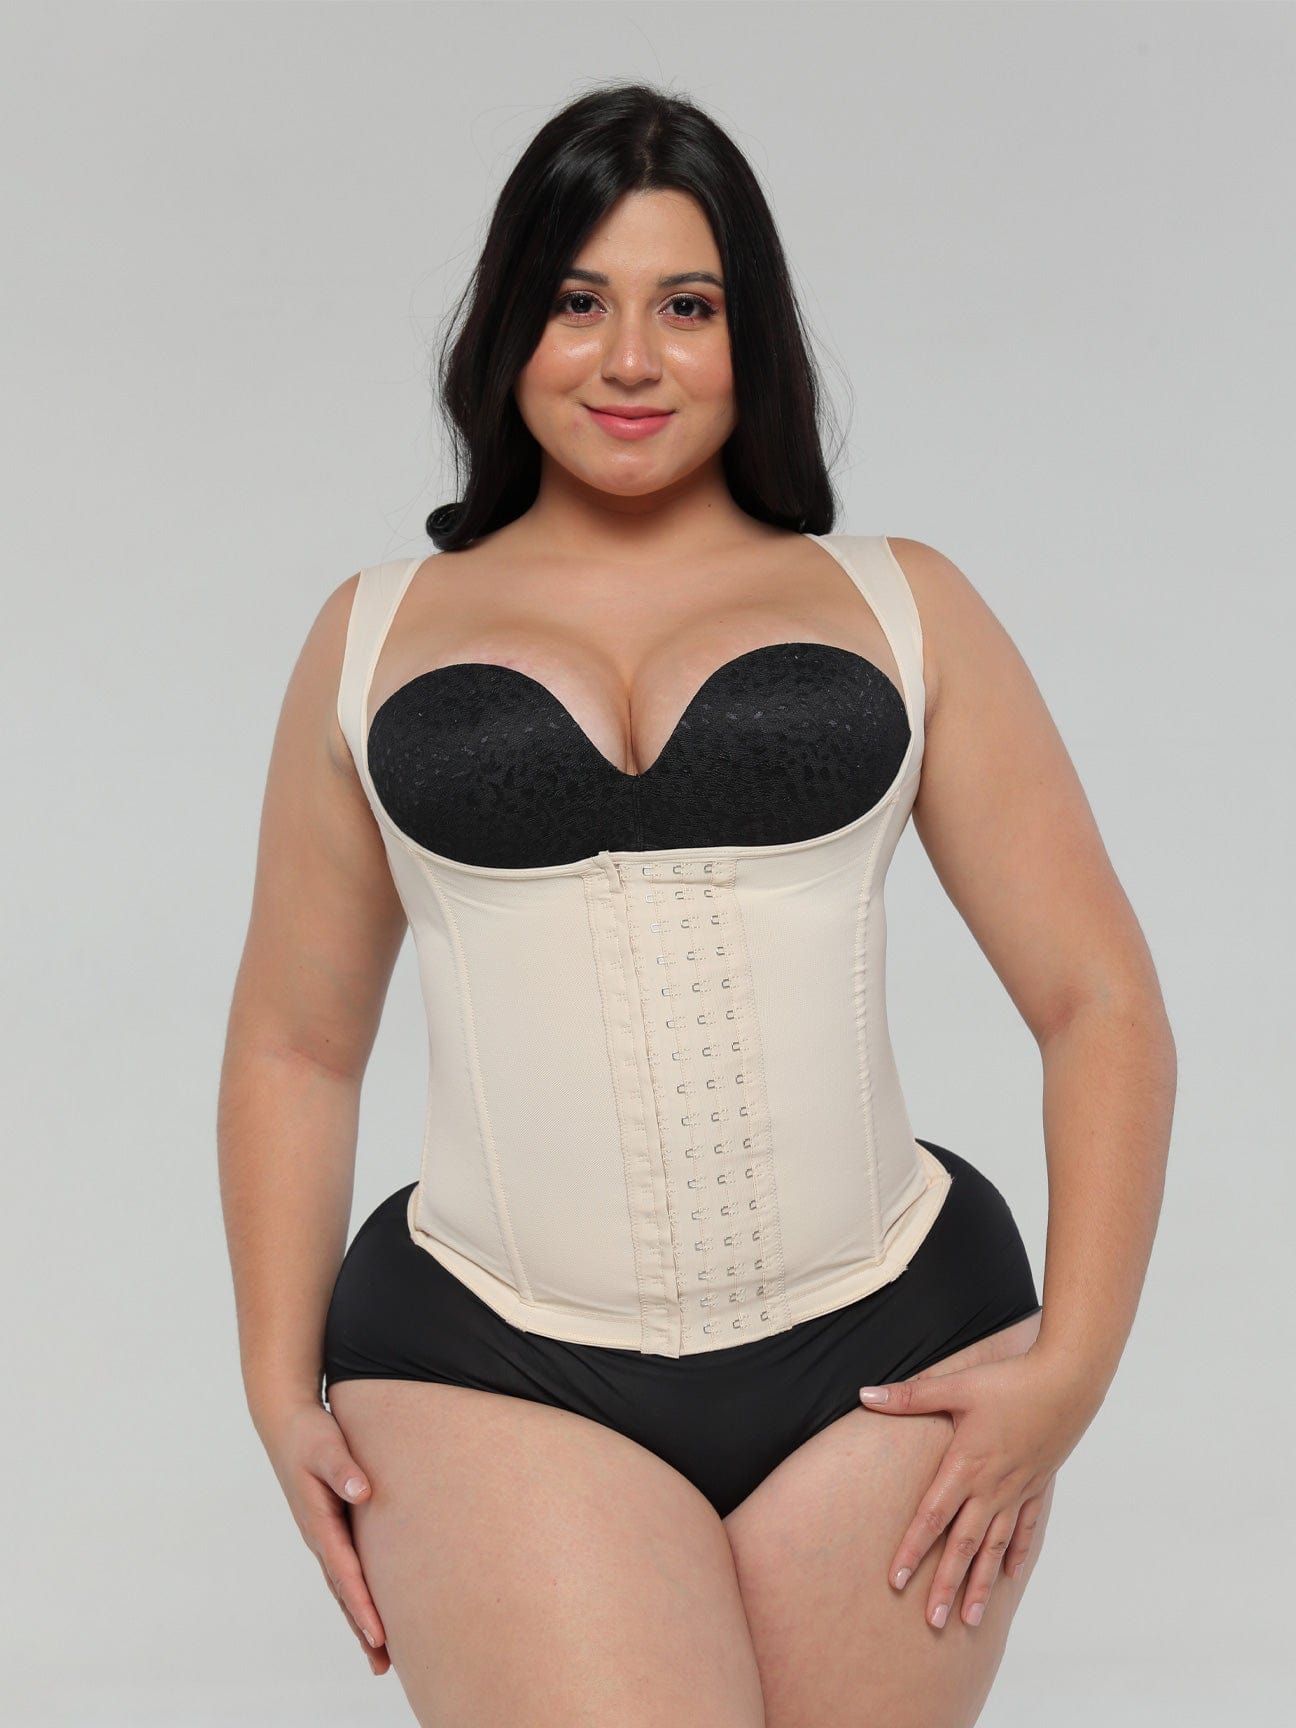  Fajate CINTURILLAS Colombianas Latex Waist  Cincher/Trainer/Trimmer/Corset Weight Loss Shaper. (Black, 3XLARGE) :  Clothing, Shoes & Jewelry